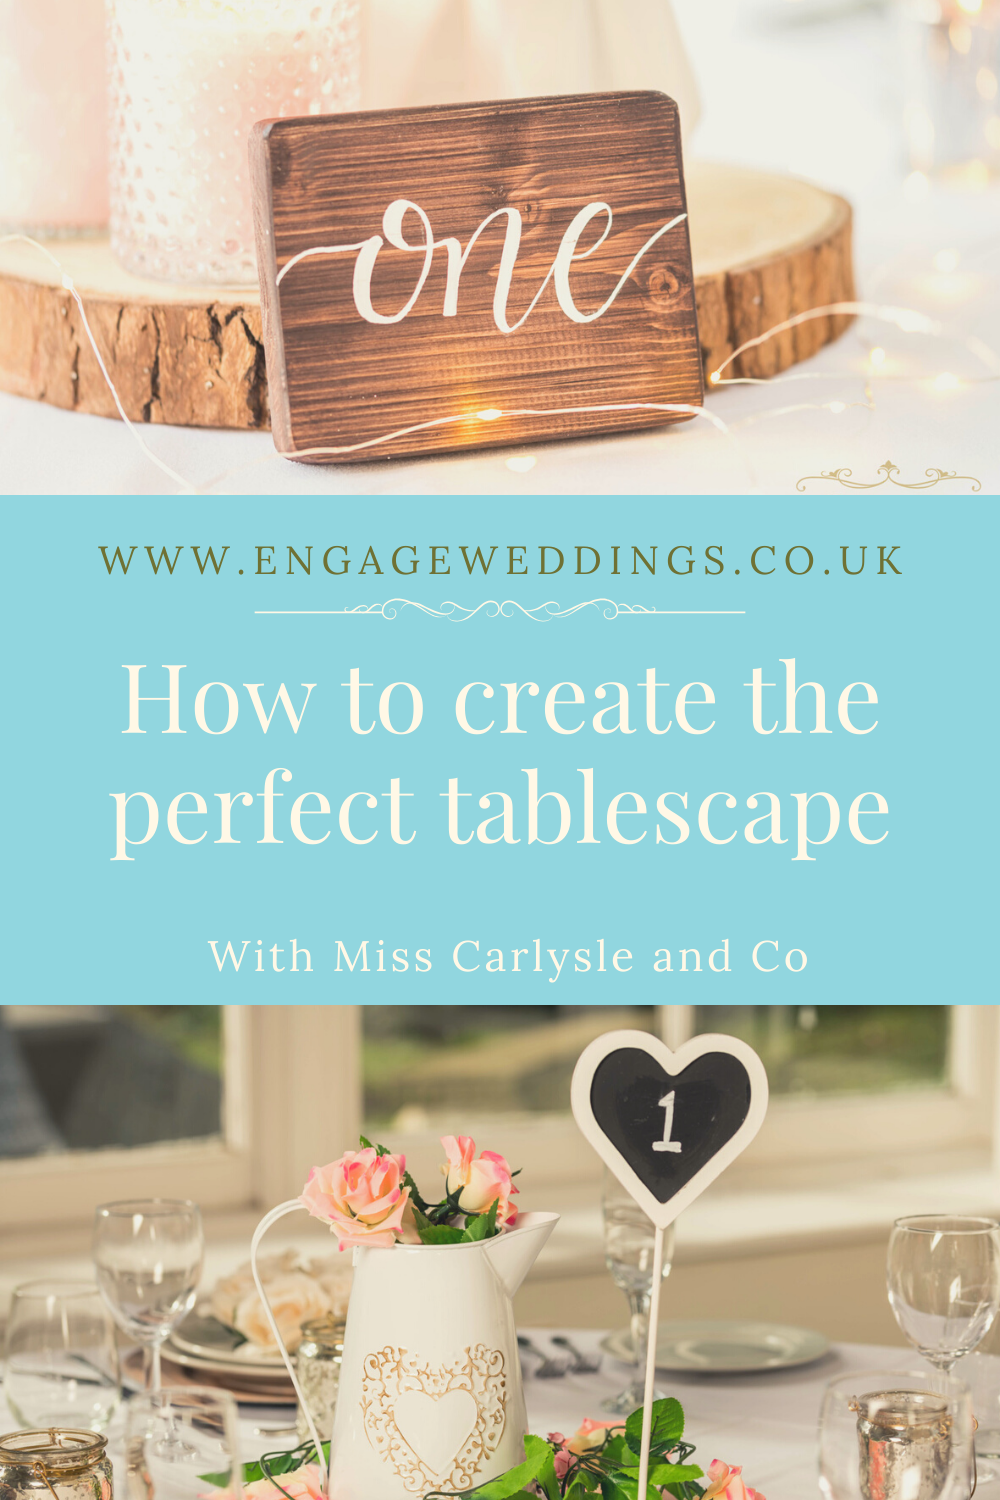 How to create the perfect tablescape_engageweddings.co.uk